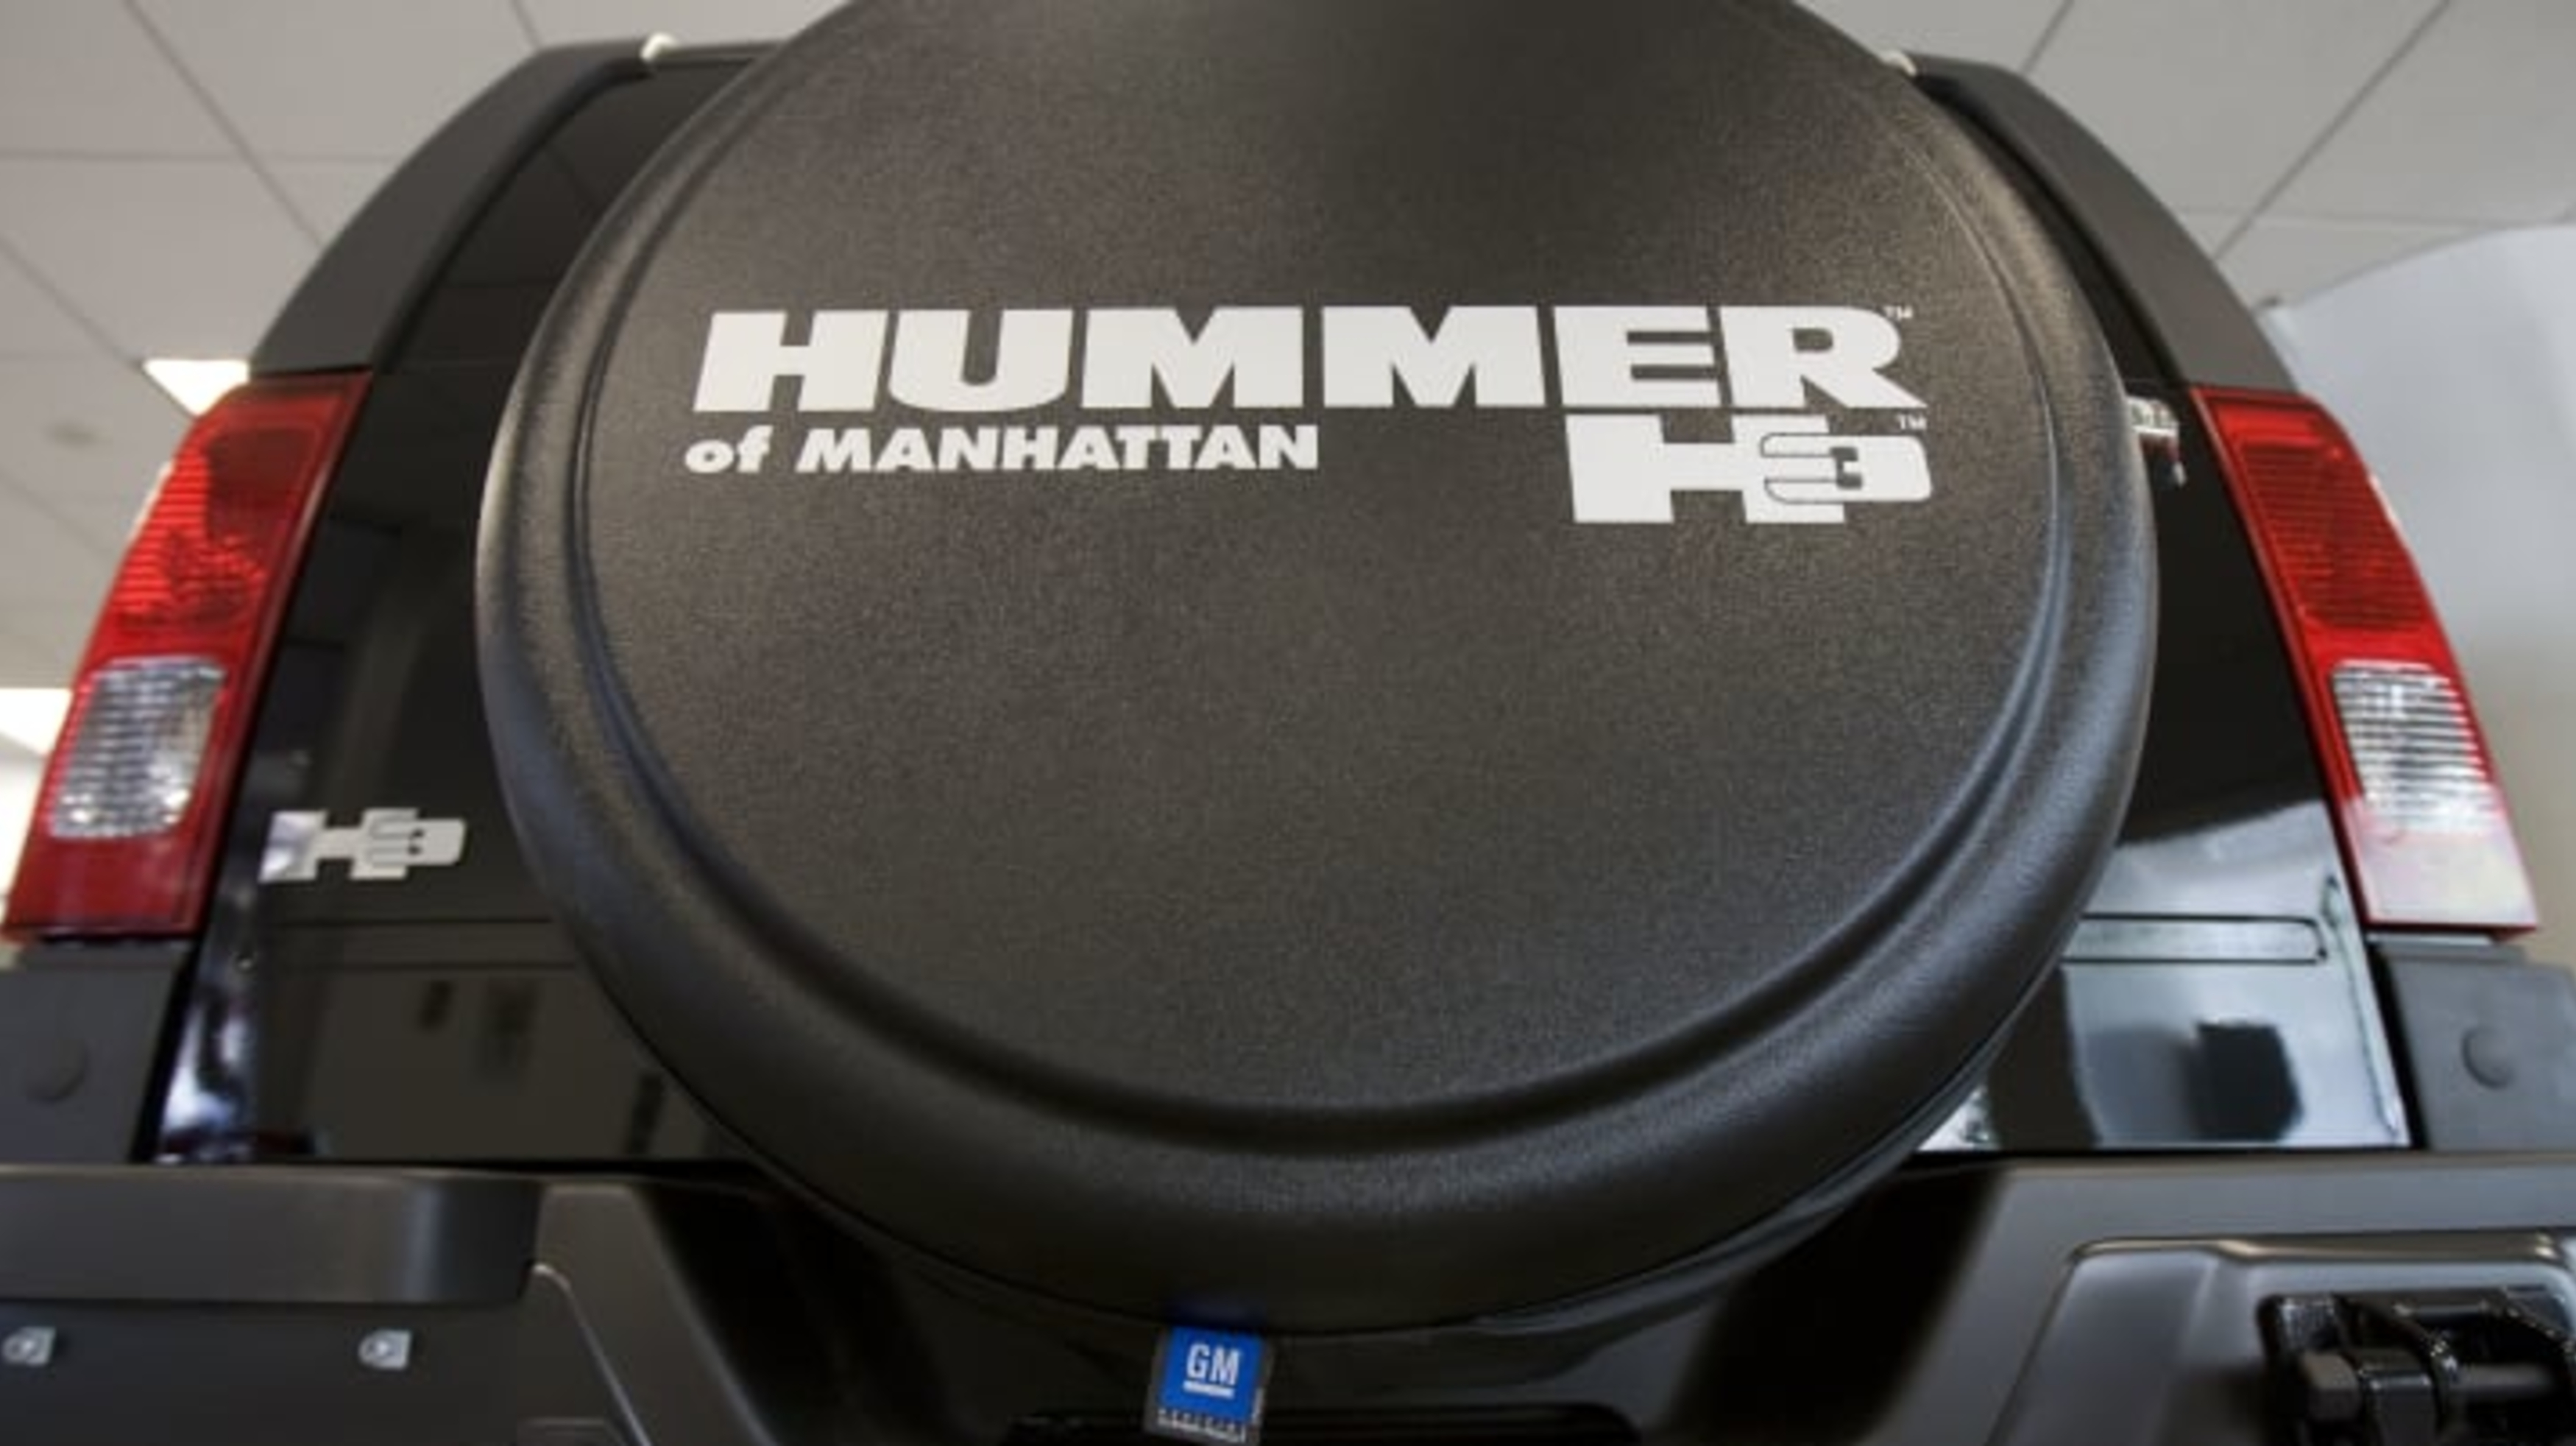 A Hummer H3 sits on display at the Hummer of Manhattan deale